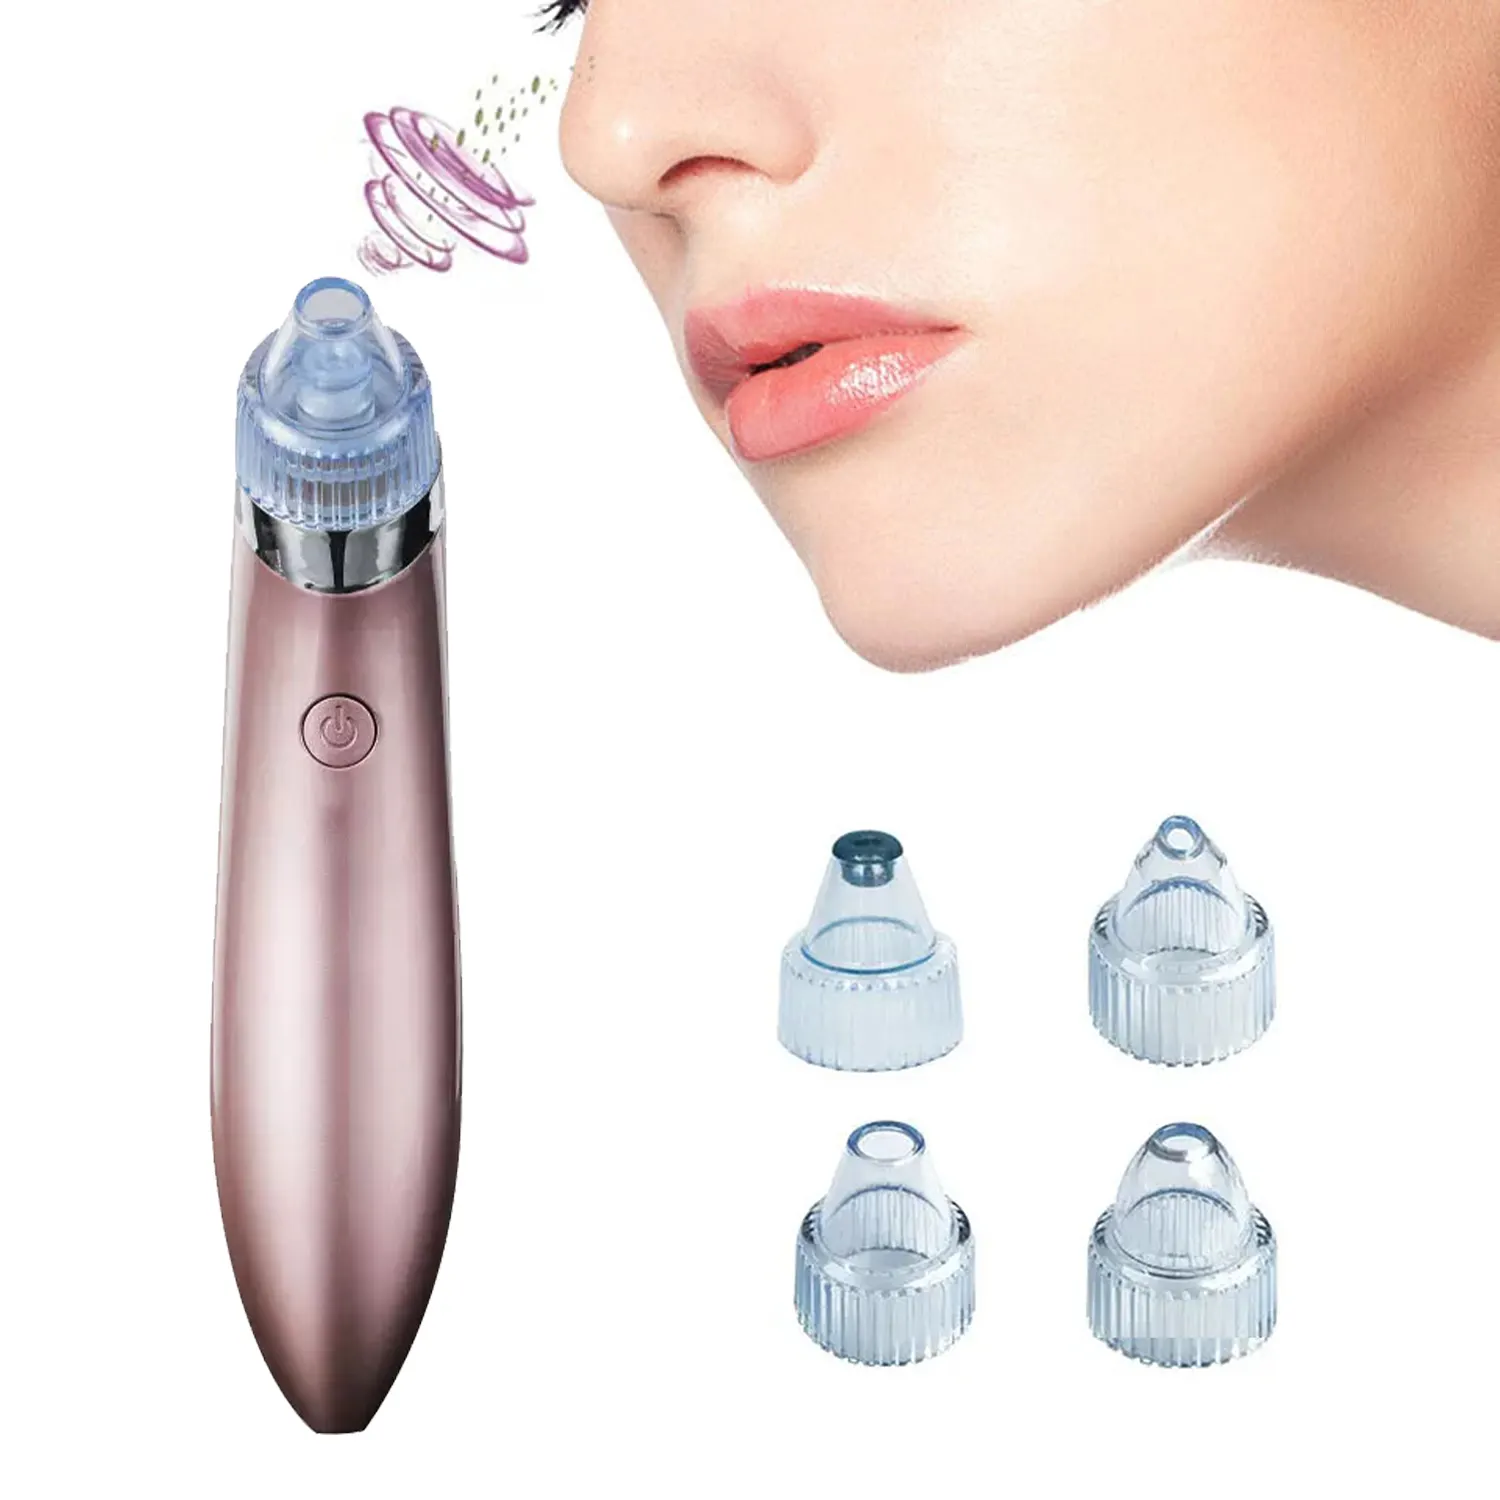 2023 Acne Remover Blackhead Electric Pore Nose Cleaner Removal Tool Vacuum Blackhead Remover With Vacuum Suction